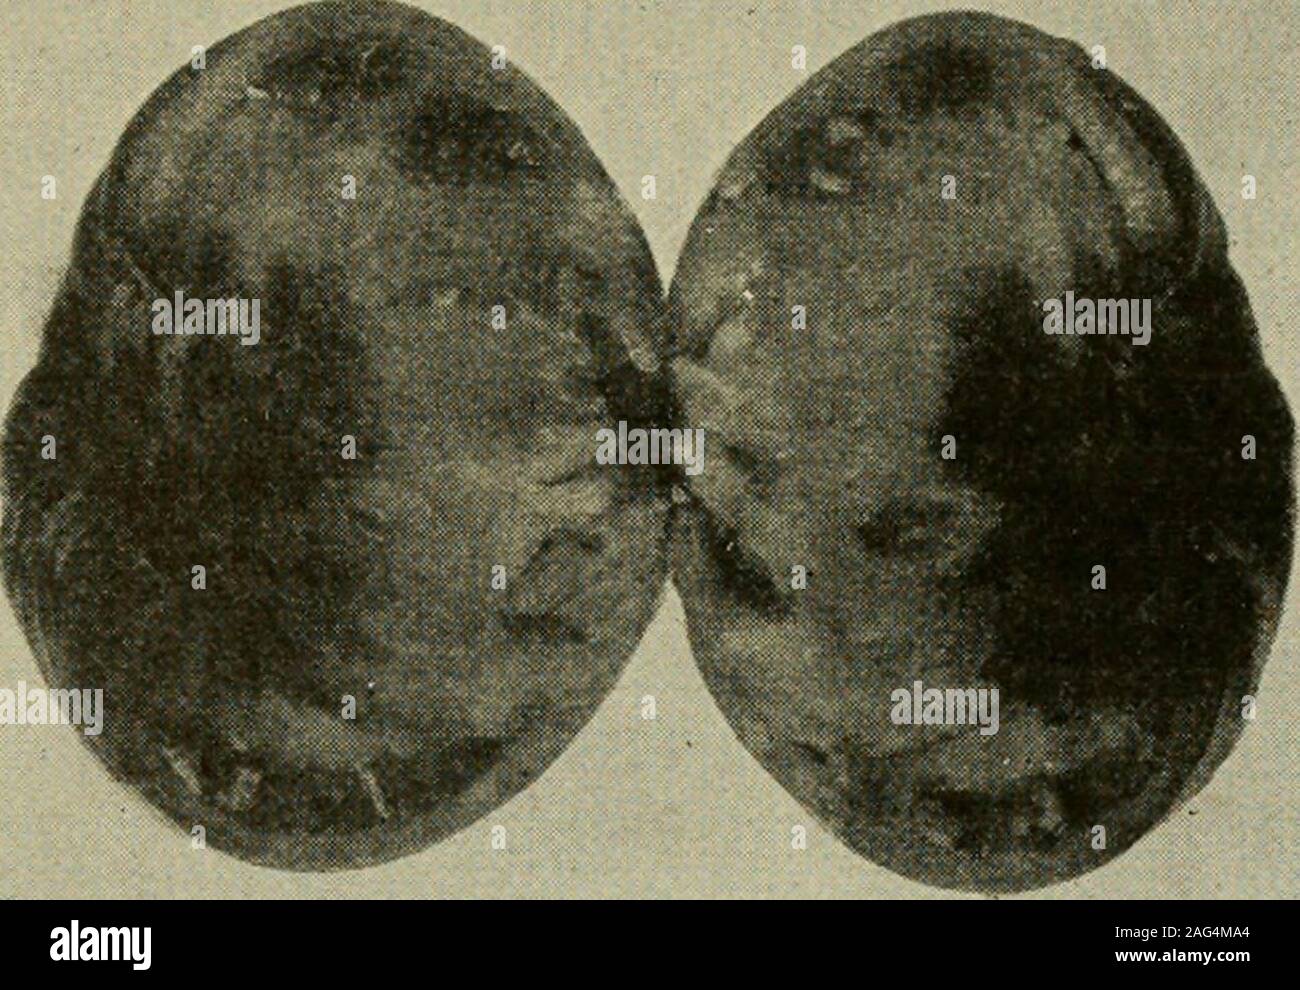 . Insect enemies and diseases of the tomato. Fig. 18.—Downy mildew on tomato fruit,dium late stage. Me- 15 BI.OSSOM.END KOT. Blossom - end rot(fig. 20j is a diseasedcondition of the blos-som end of the fruit.It is most common indry weather, especial-ly after a period ofrapid growth. Themost successful method of overcoming itis to water the soil.. Stock Photo